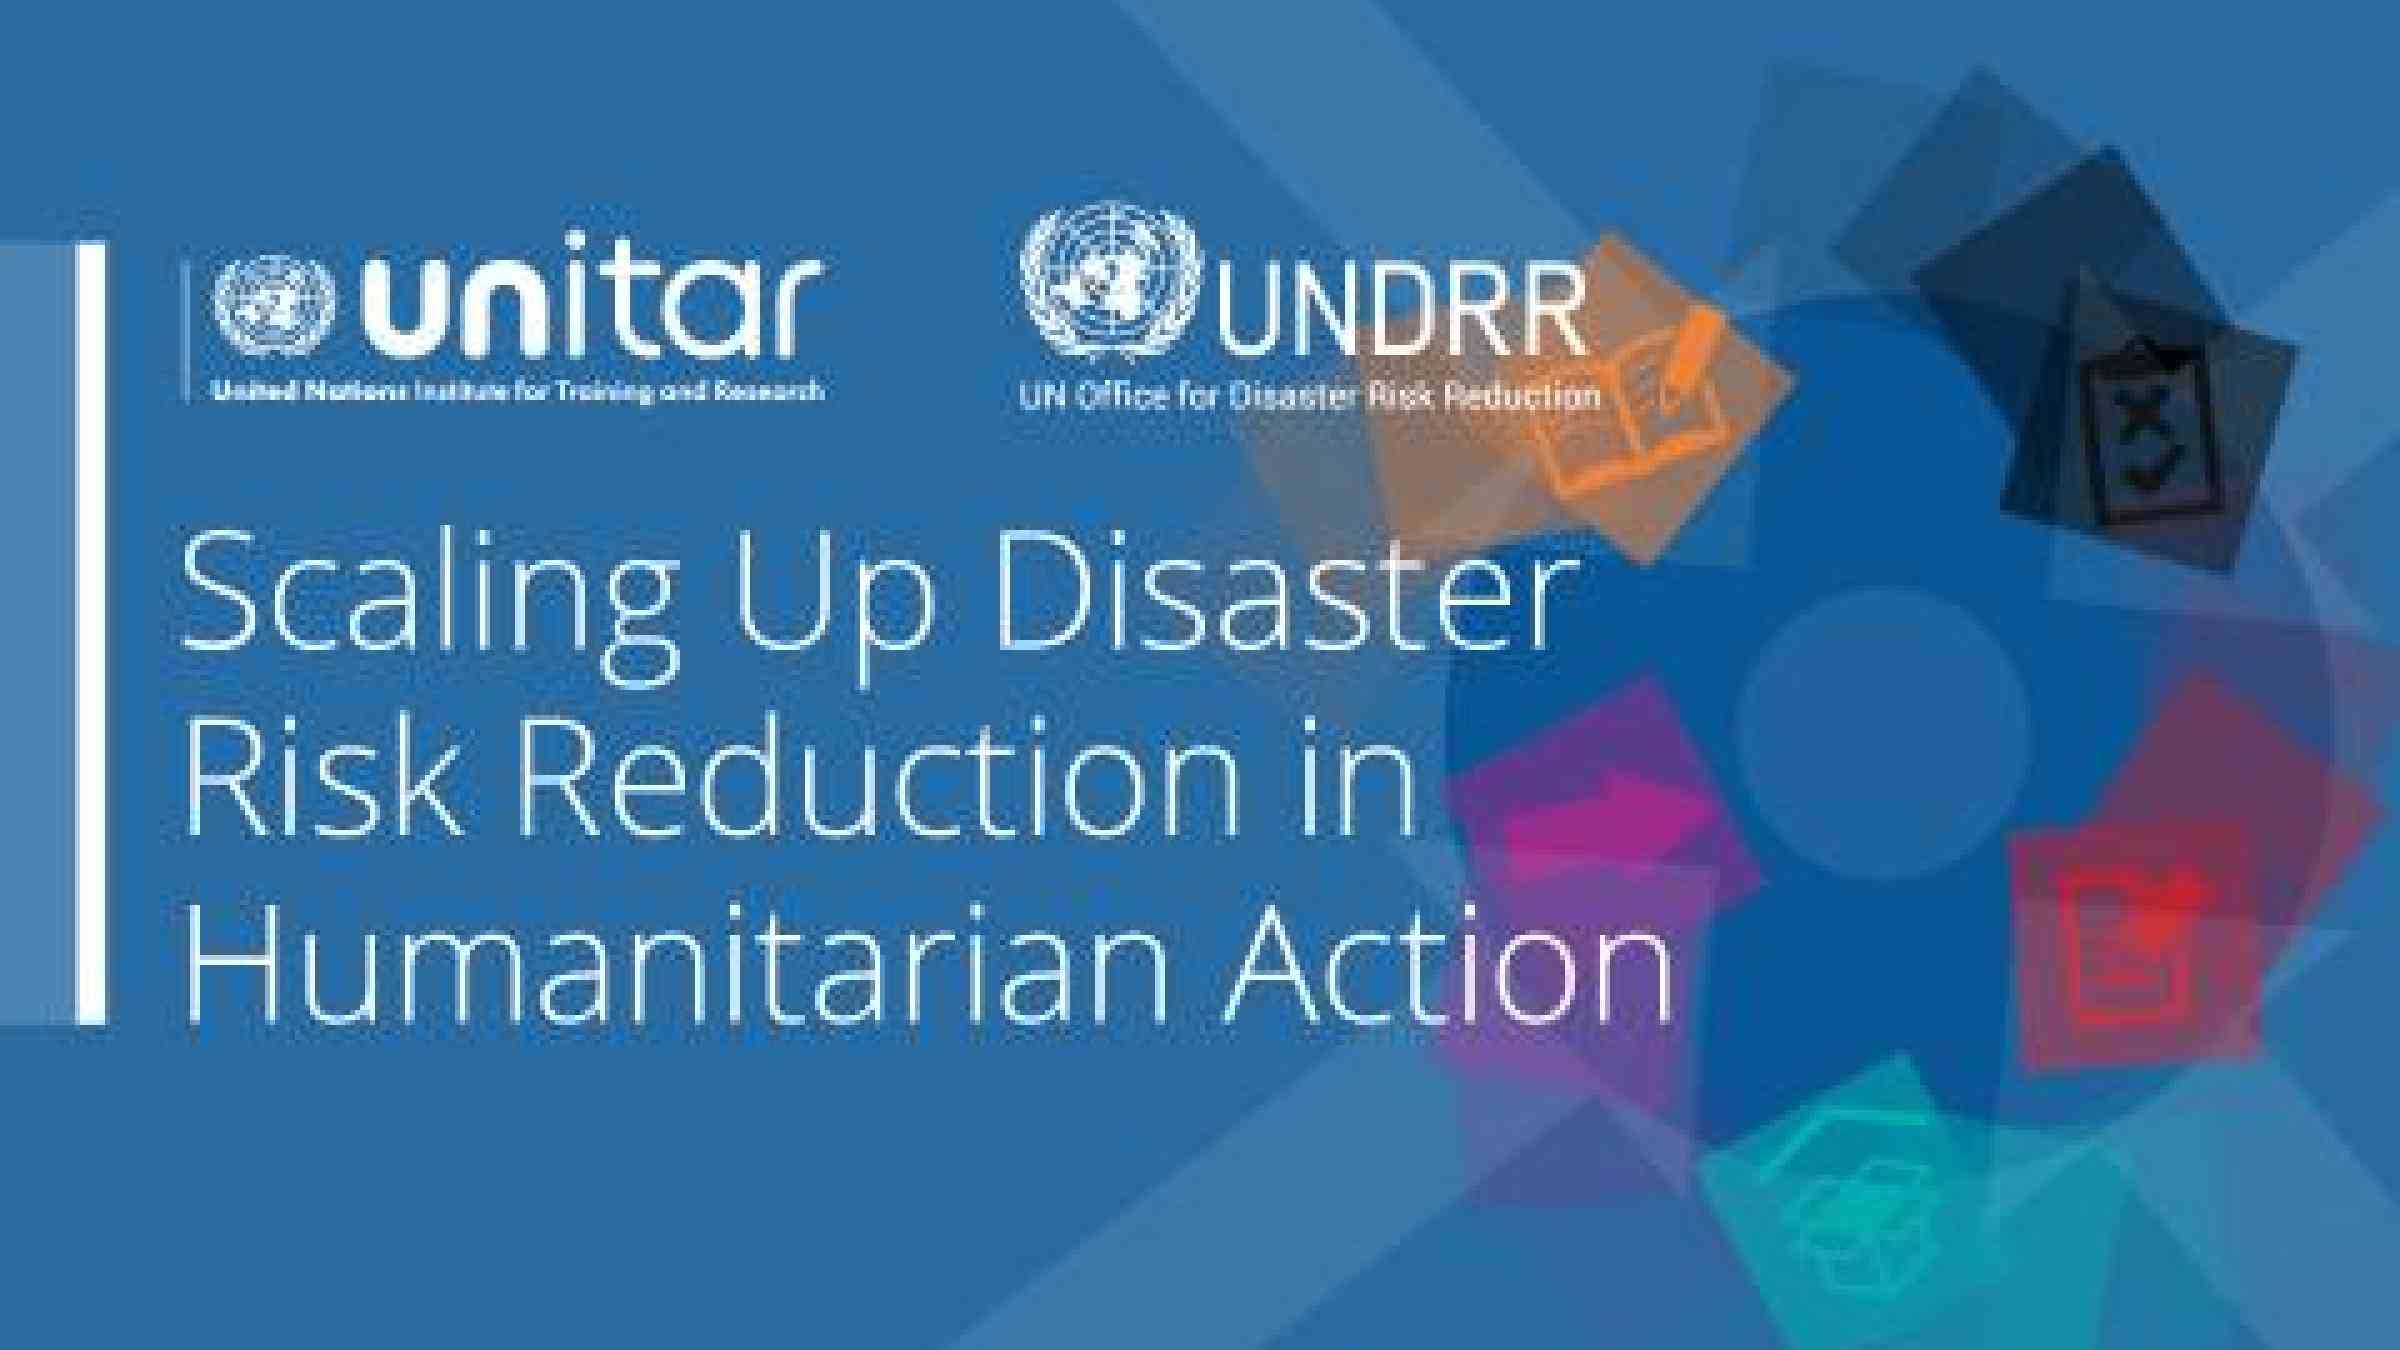 Banner for training on Scaling Up Disaster Risk Reduction in Humanitarian Action